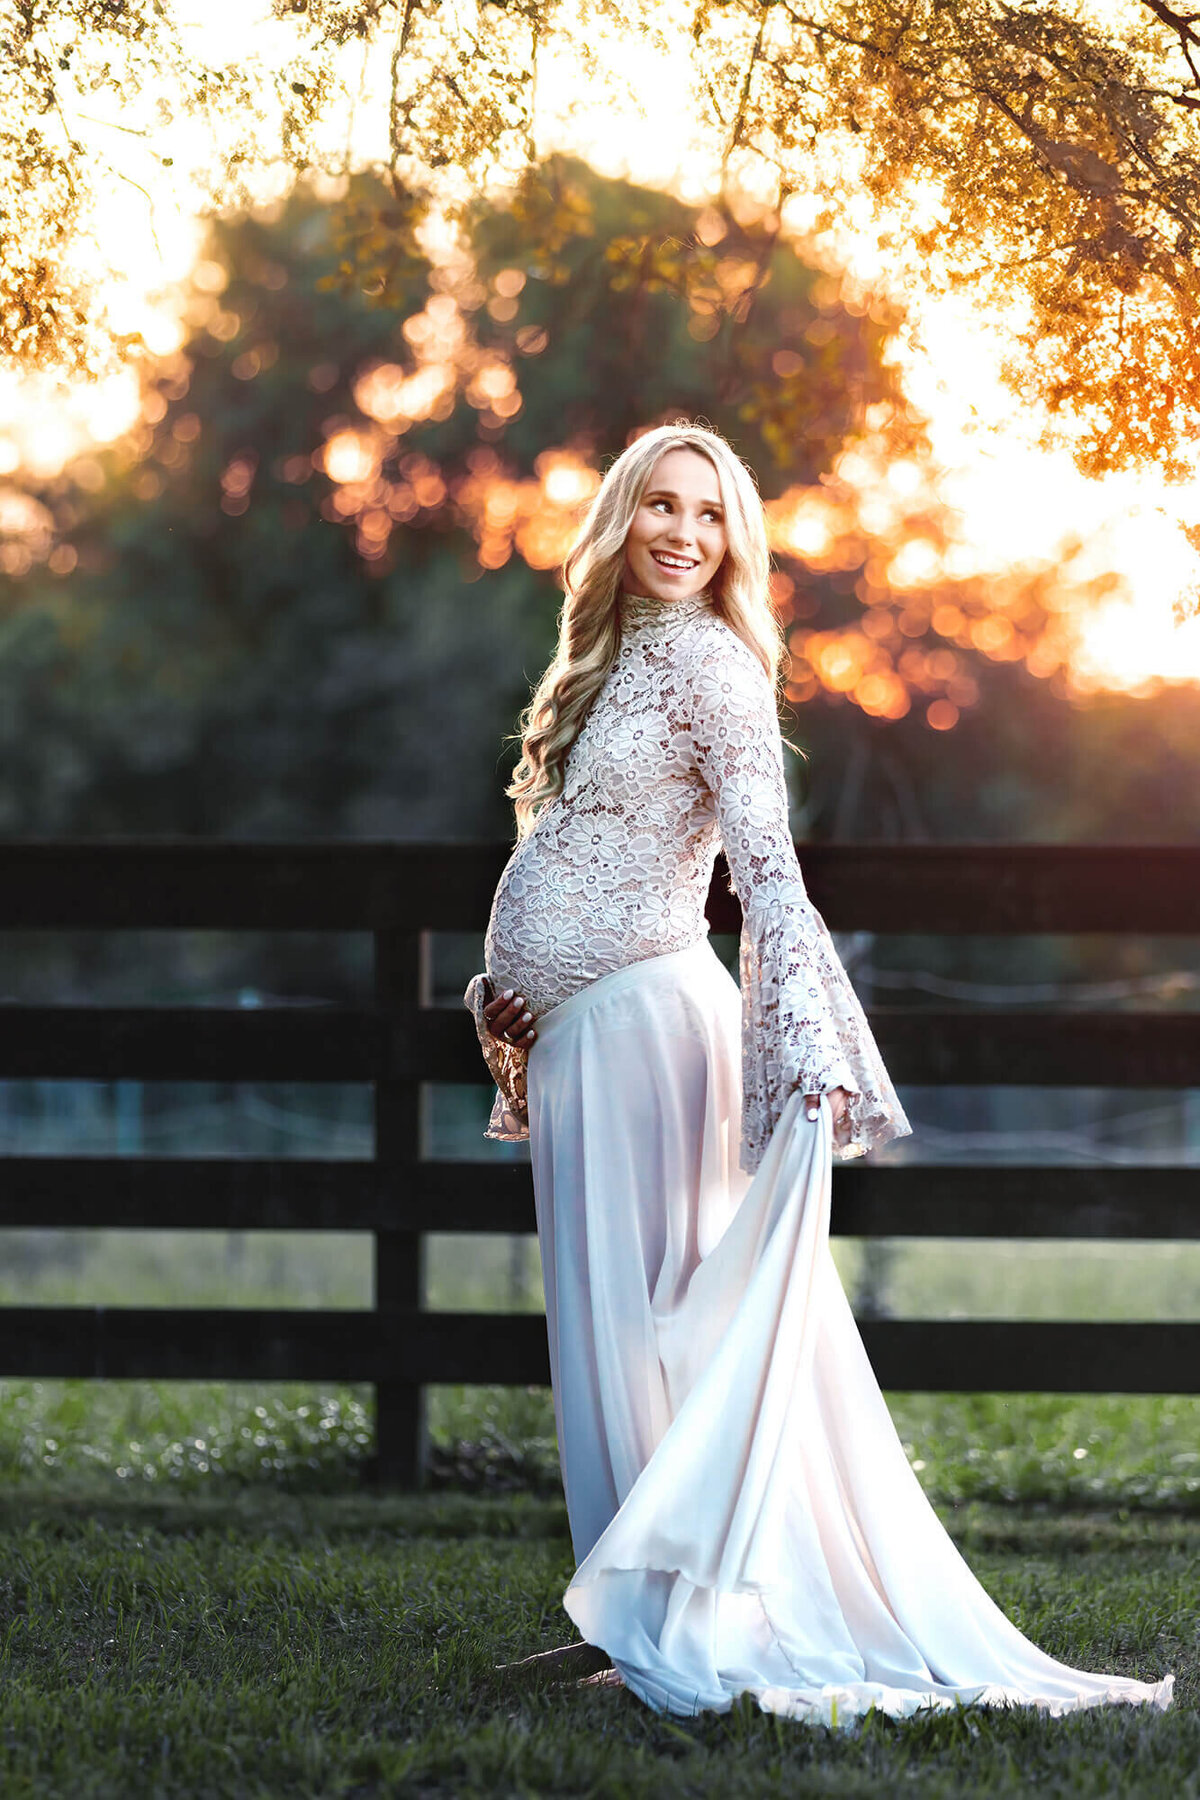 Beautiful mom to be wearing one of the beautiful maternity gowns from Mii-Estilo in Houston, Texas.